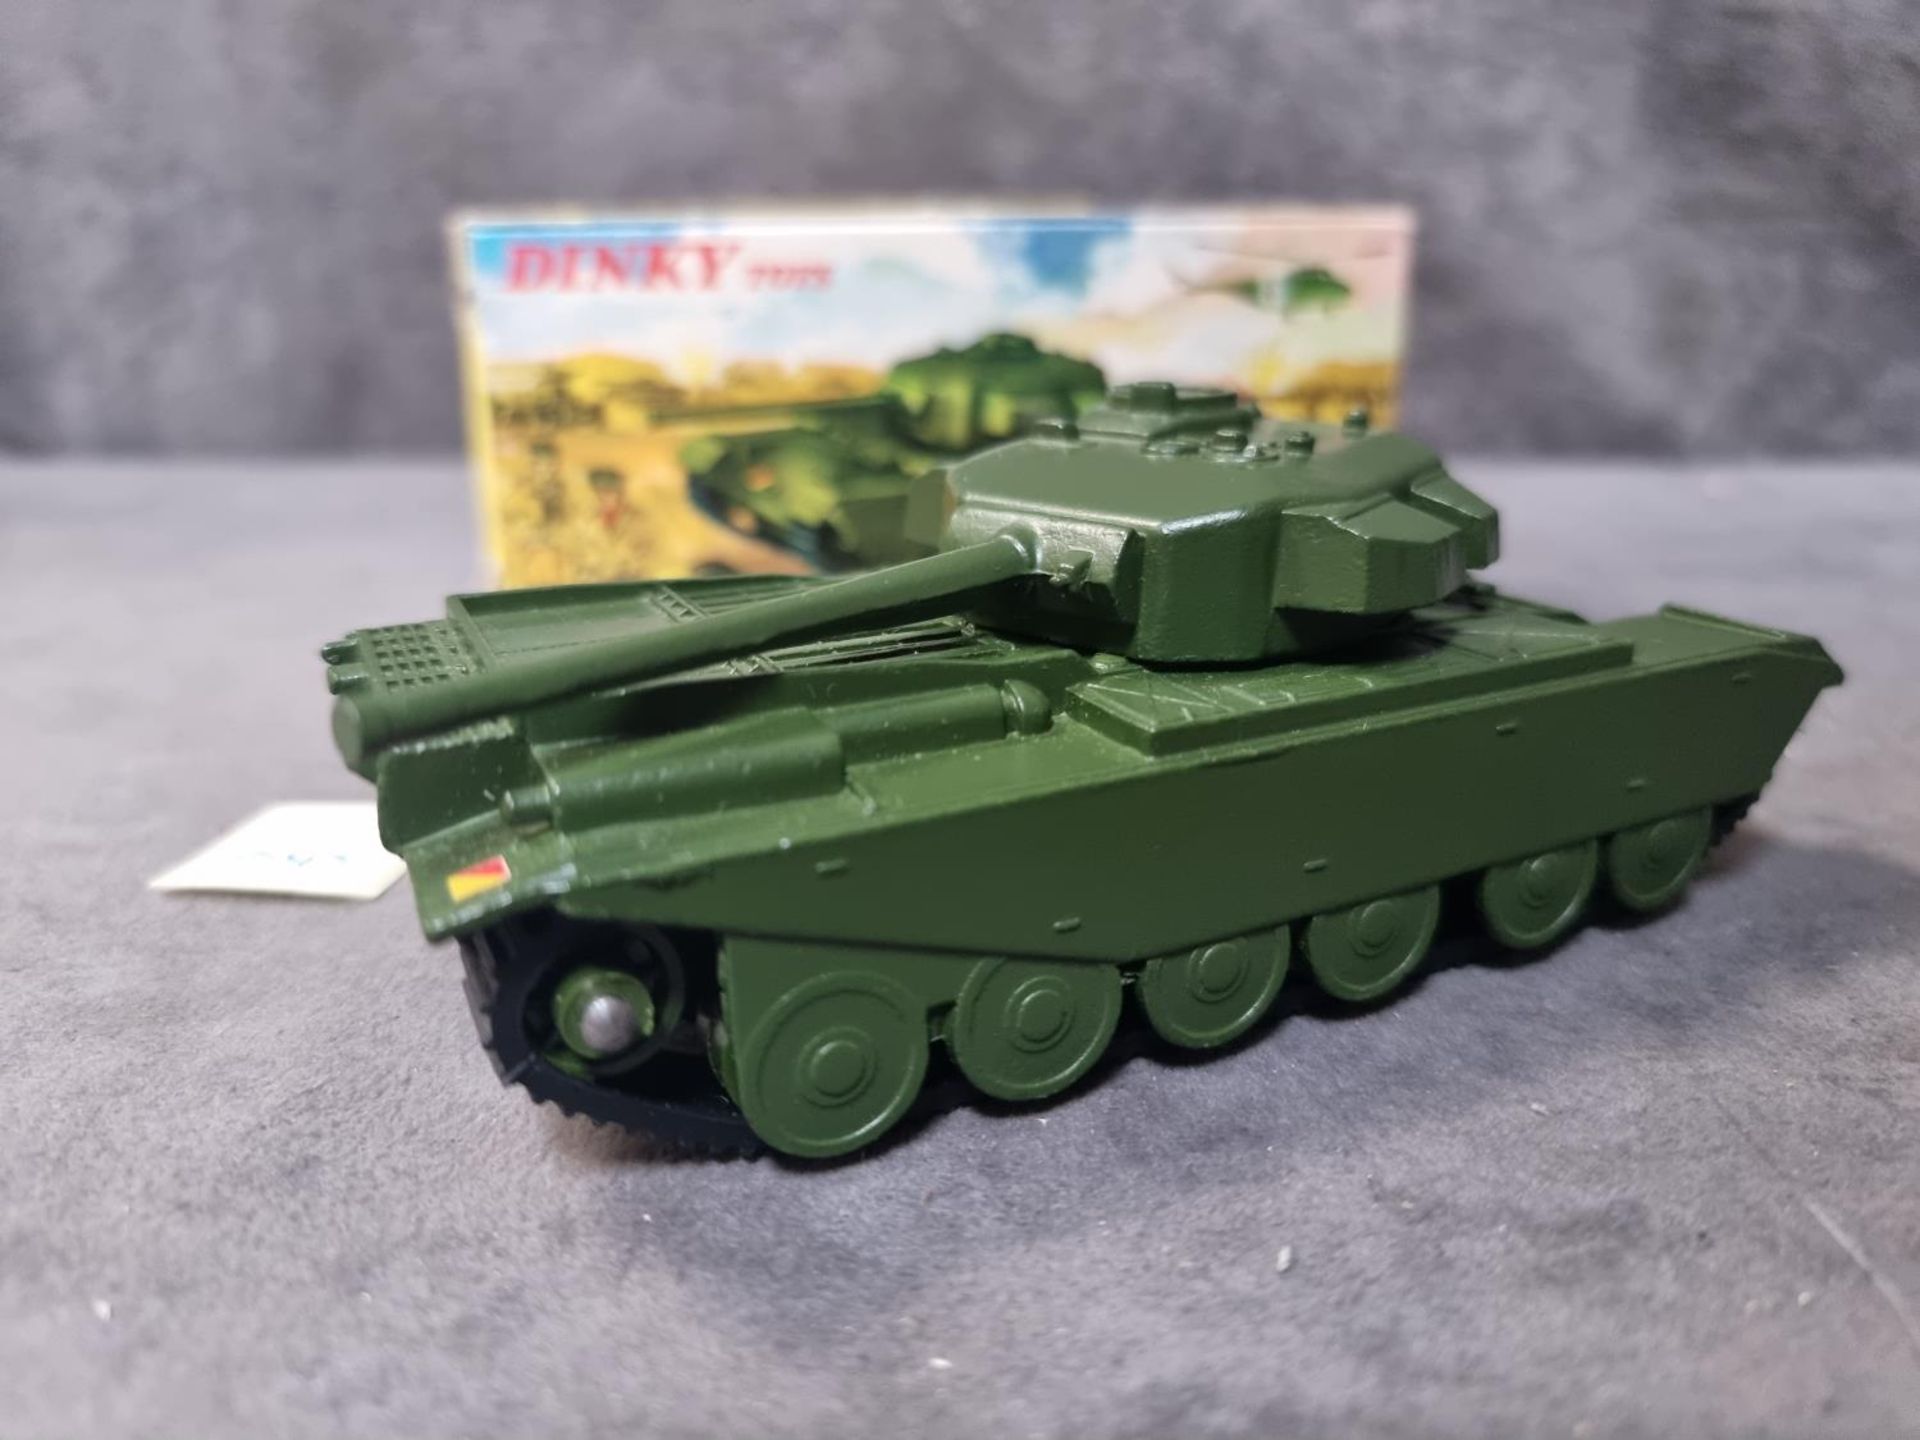 Dinky #651 Centurion Tank Green Rubber Tracks And Rotating Turret In Box 1954-1970 Near Mint In - Image 3 of 3